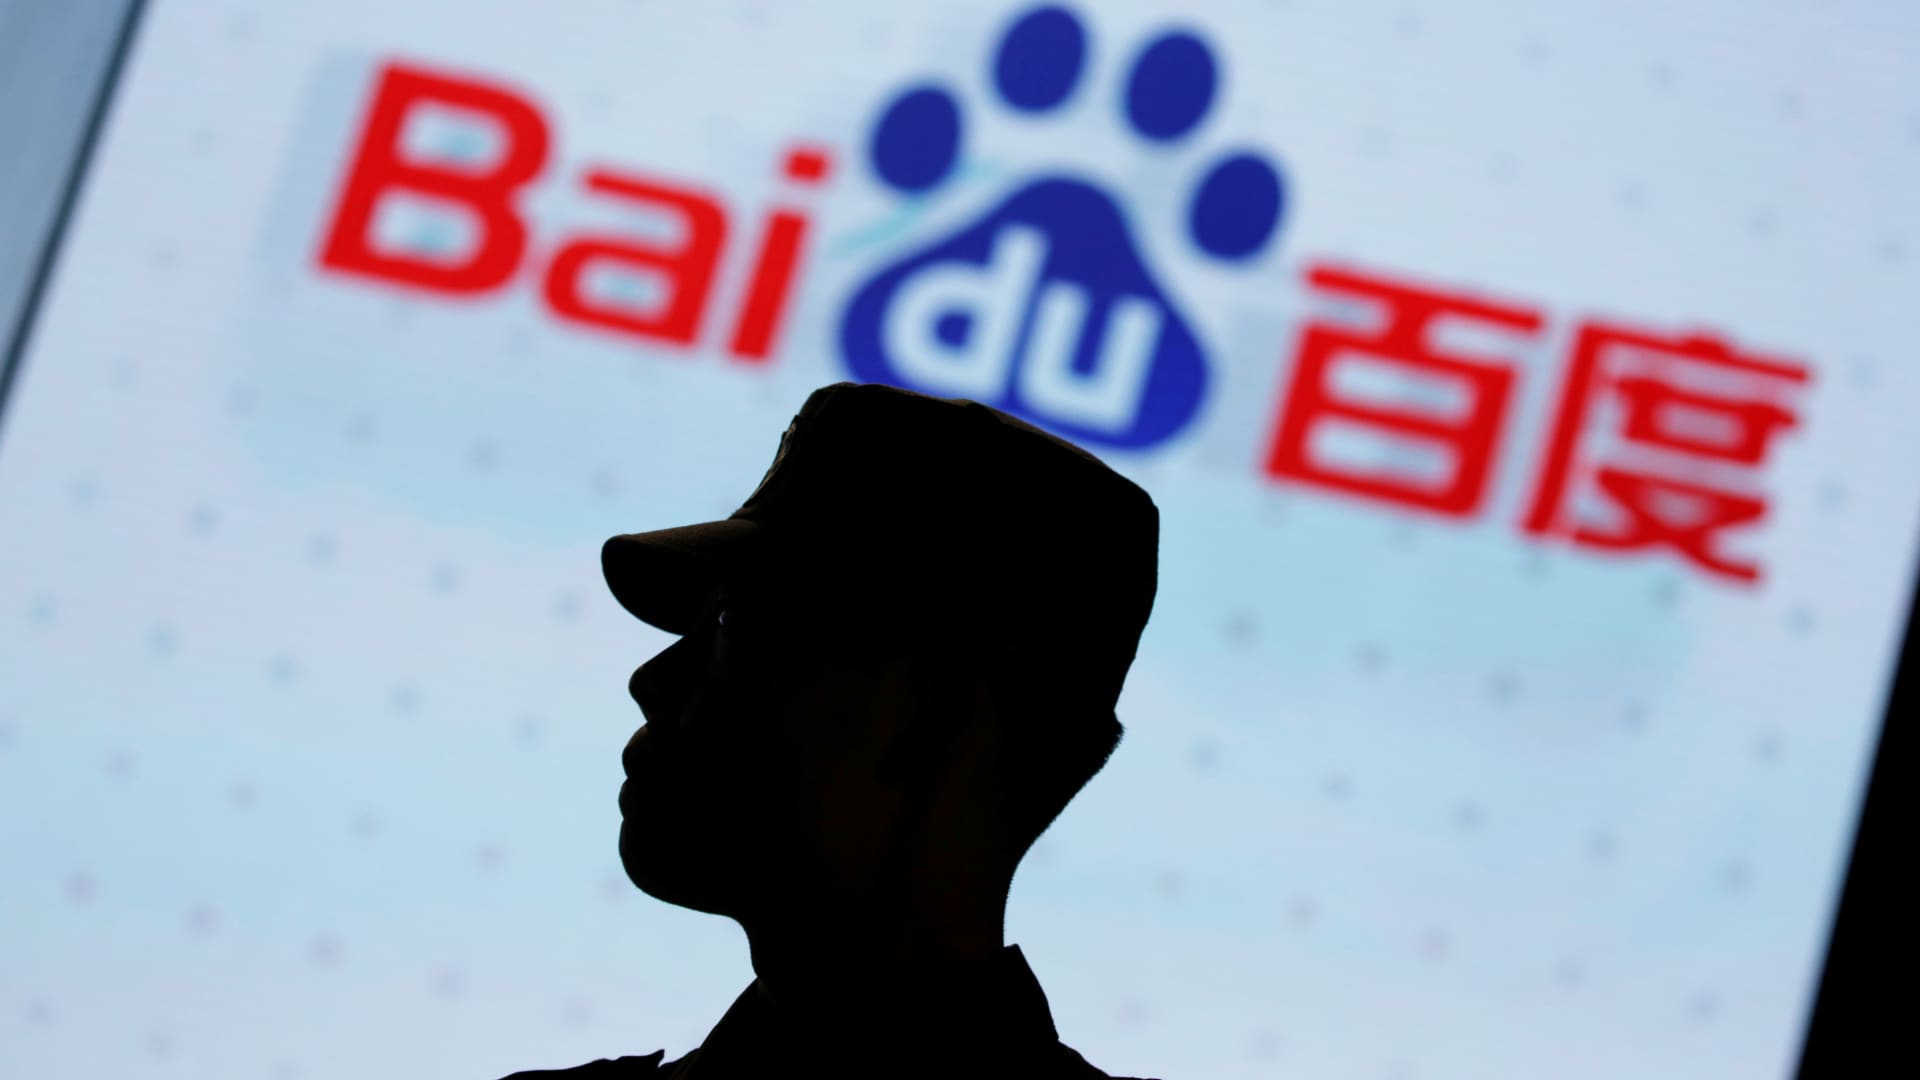 A security personnel stands guard at the opening session of Baidu's annual AI developers conference Baidu Create 2019 in Beijing, China, July 3, 2019.